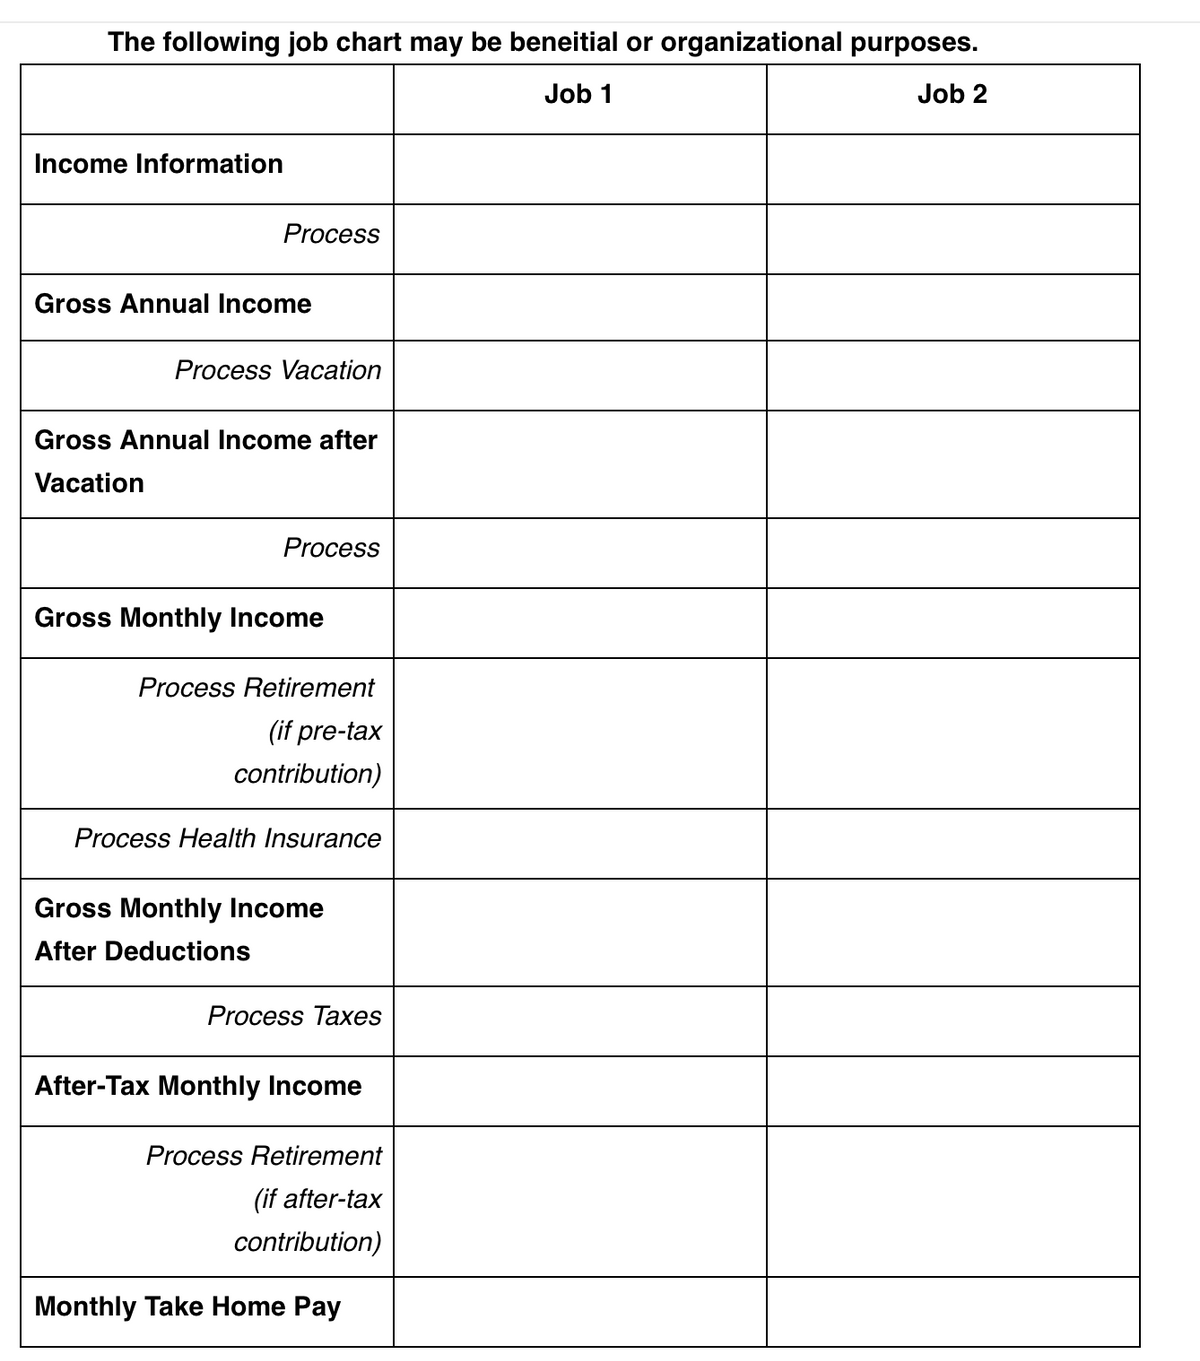 The following job chart may be beneitial or organizational purposes.
Job 1
Job 2
Income Information
Process
Gross Annual Income
Process Vacation
Gross Annual Income after
Vacation
Process
Gross Monthly Income
Process Retirement
(if pre-tax
contribution)
Process Health Insurance
Gross Monthly Income
After Deductions
Process Taxes
After-Tax Monthly Income
Process Retirement
(if after-tax
contribution)
Monthly Take Home Pay
